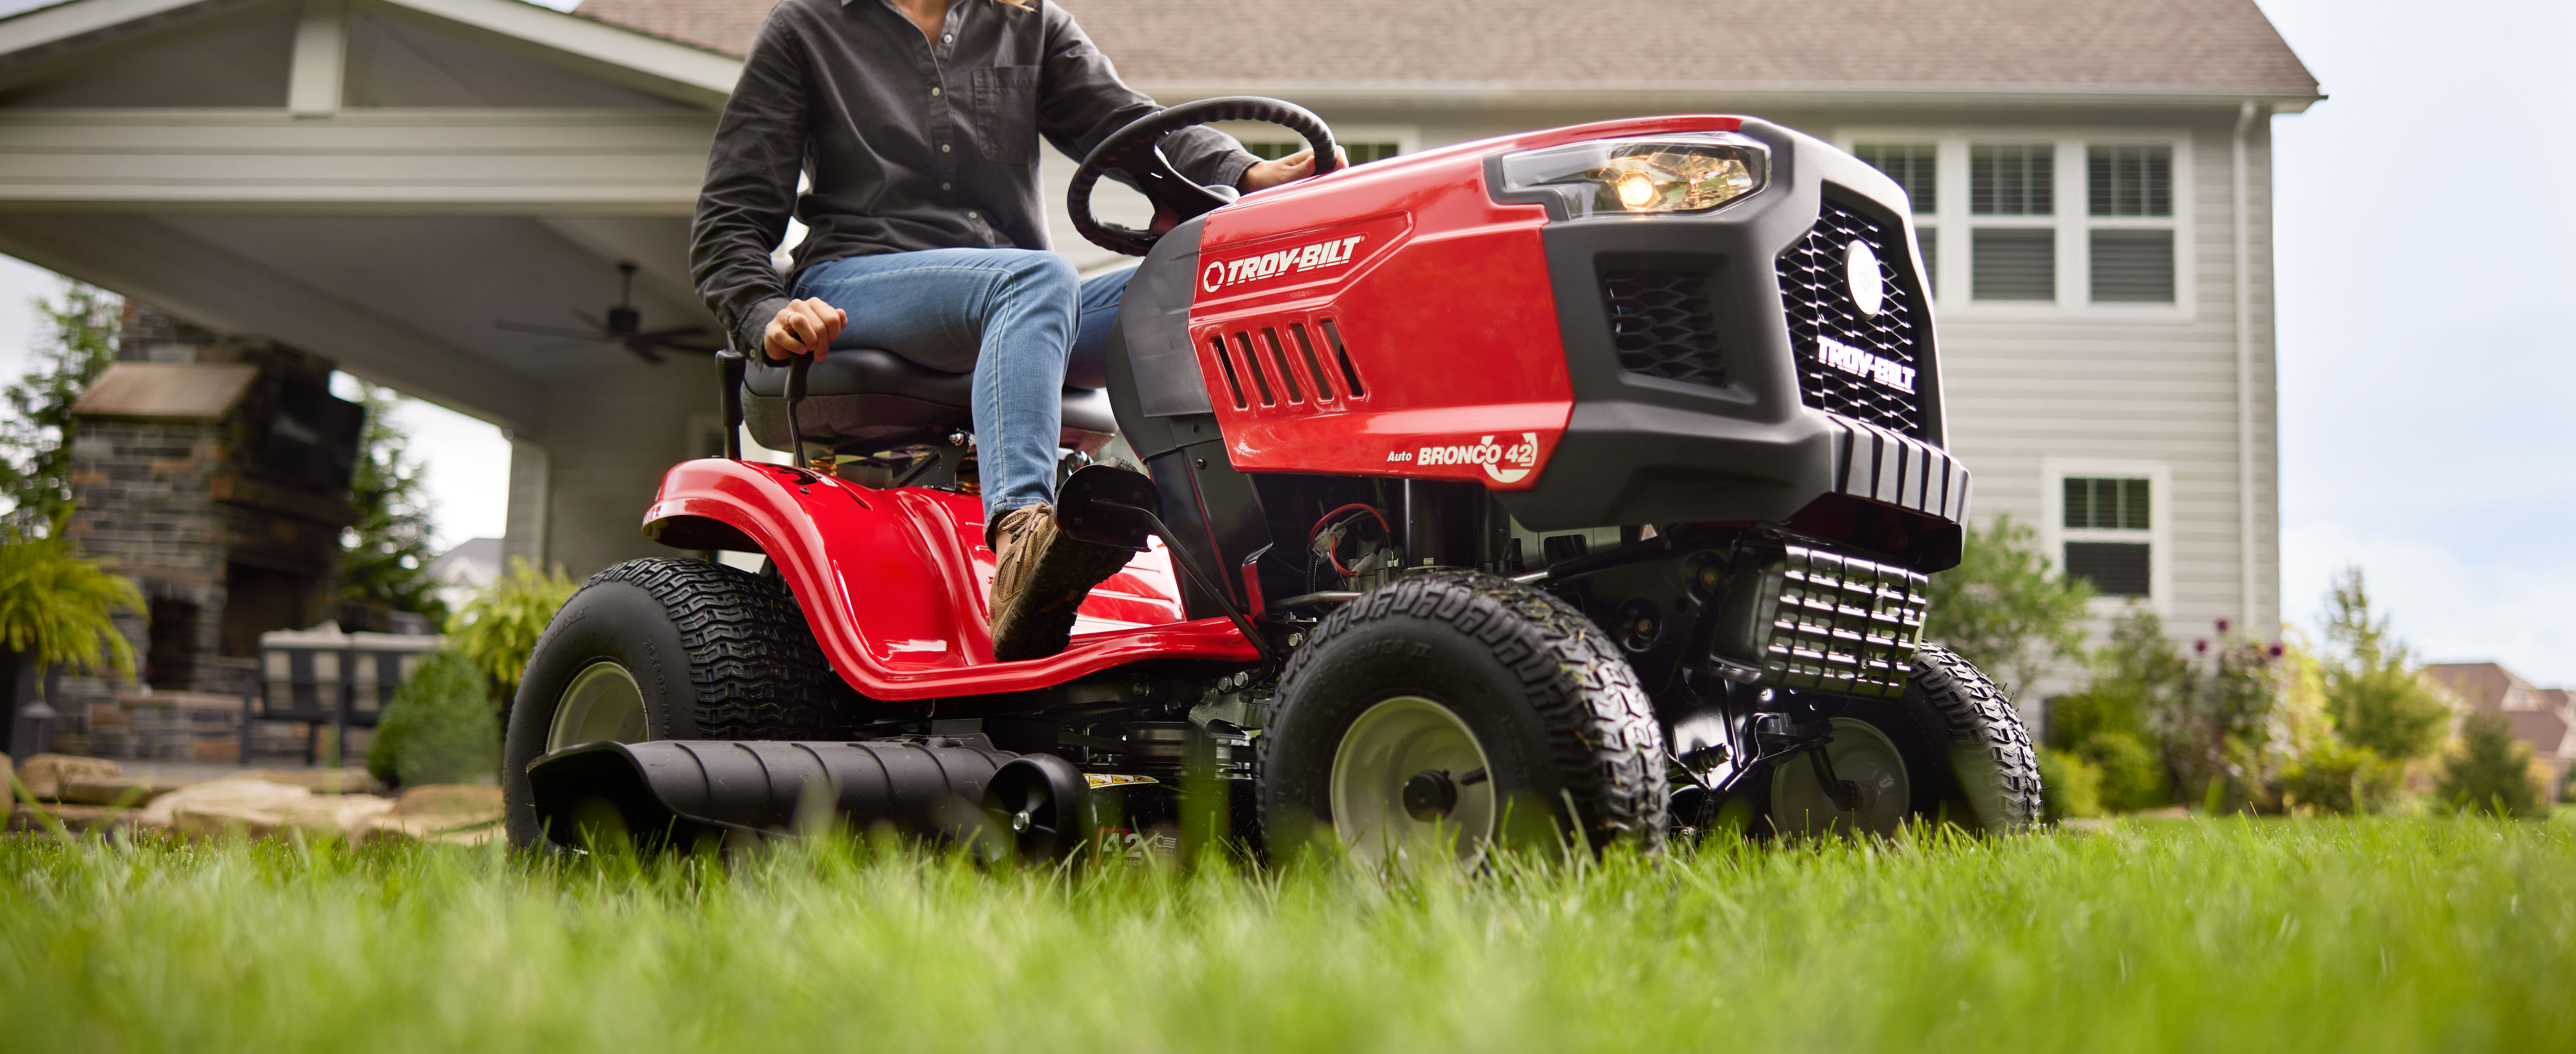 person cutting grass with a troy bilt riding lawn mower